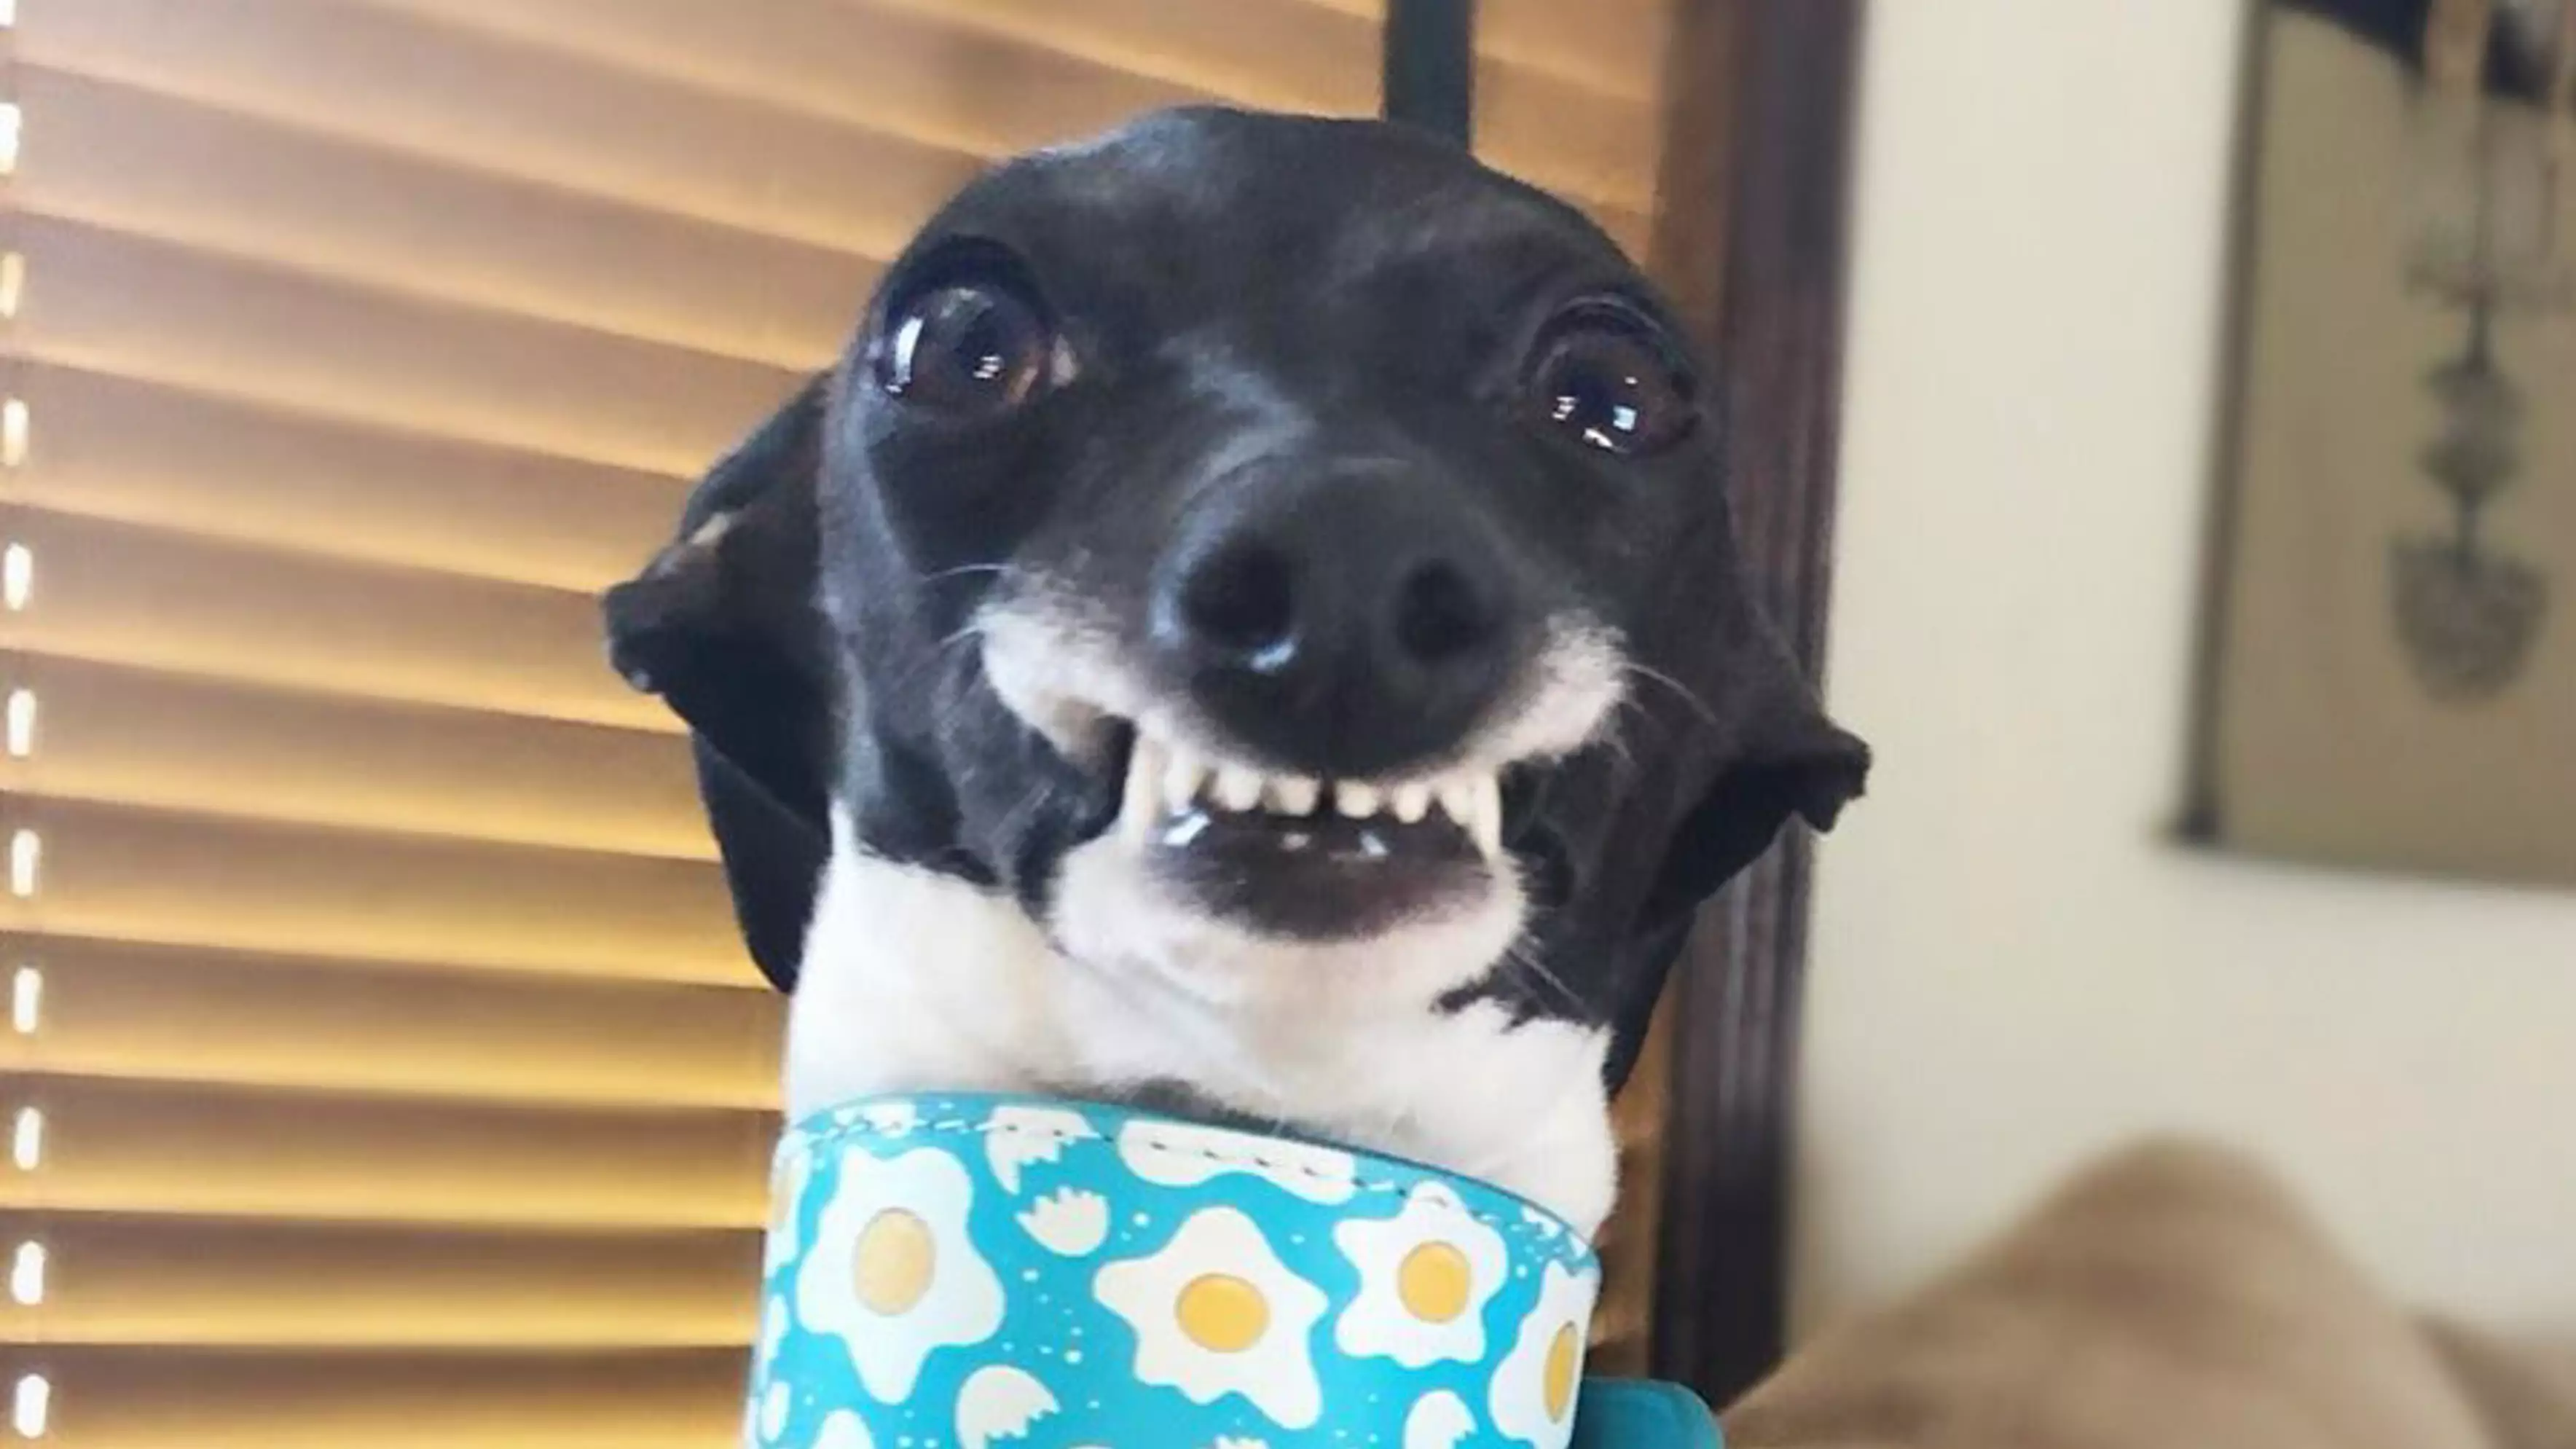 Adorable Greyhound With Goofy Teeth Literally Can't Stop Smiling